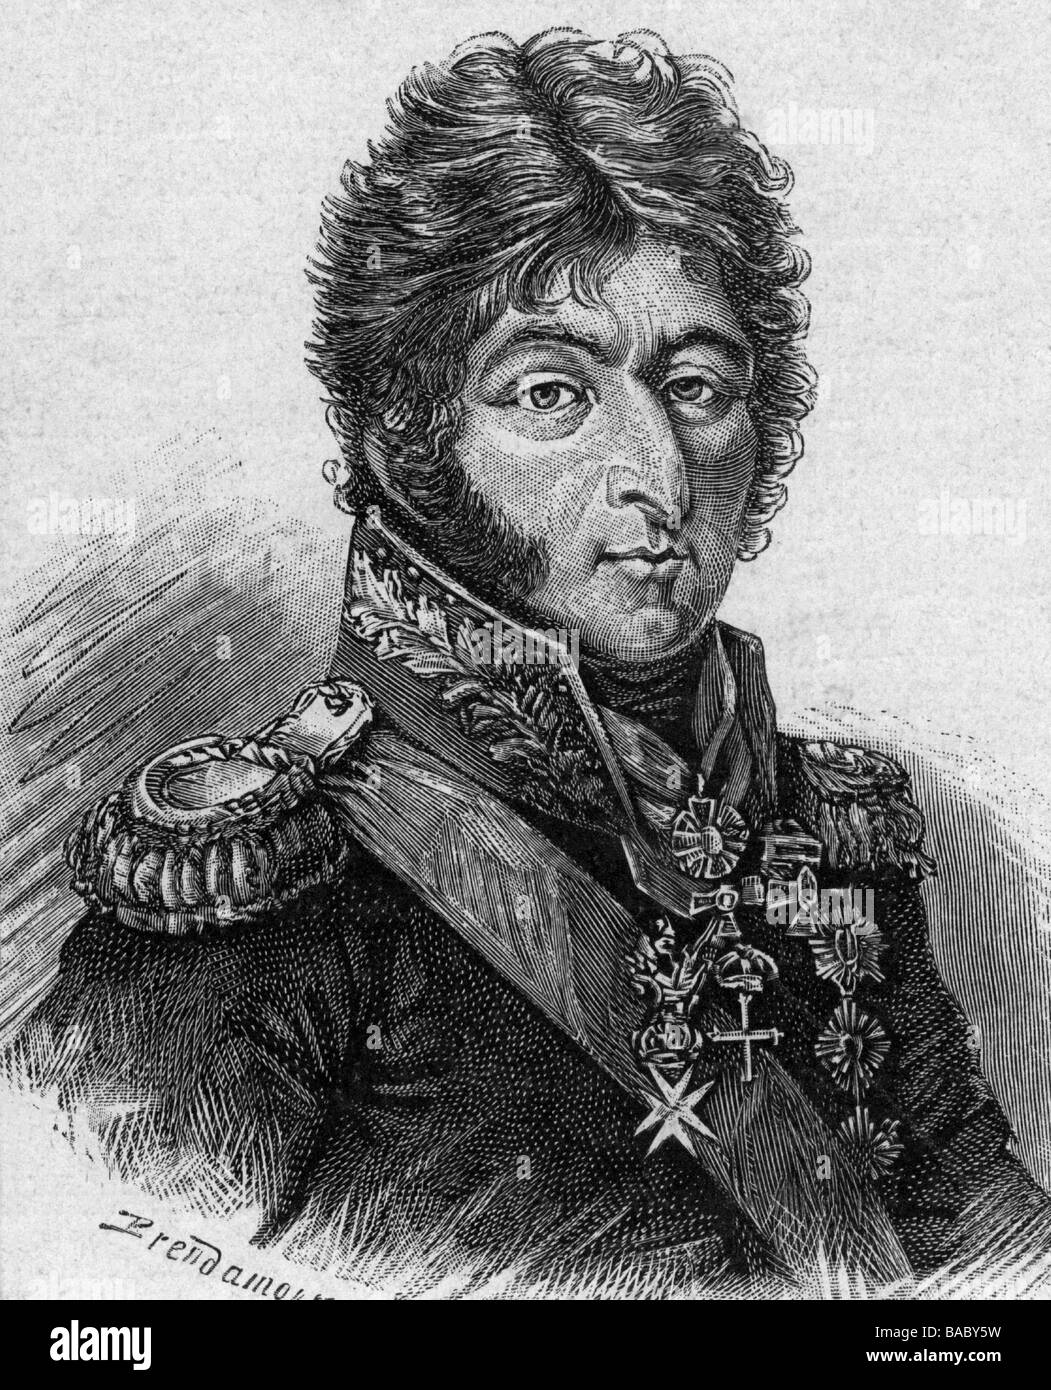 Bagration, Pyotr Ivanovich, Prince, 1765 - 24.9.1812, Russian general, portrait, wood engraving after engraving by Vendramini, 19th century, Stock Photo